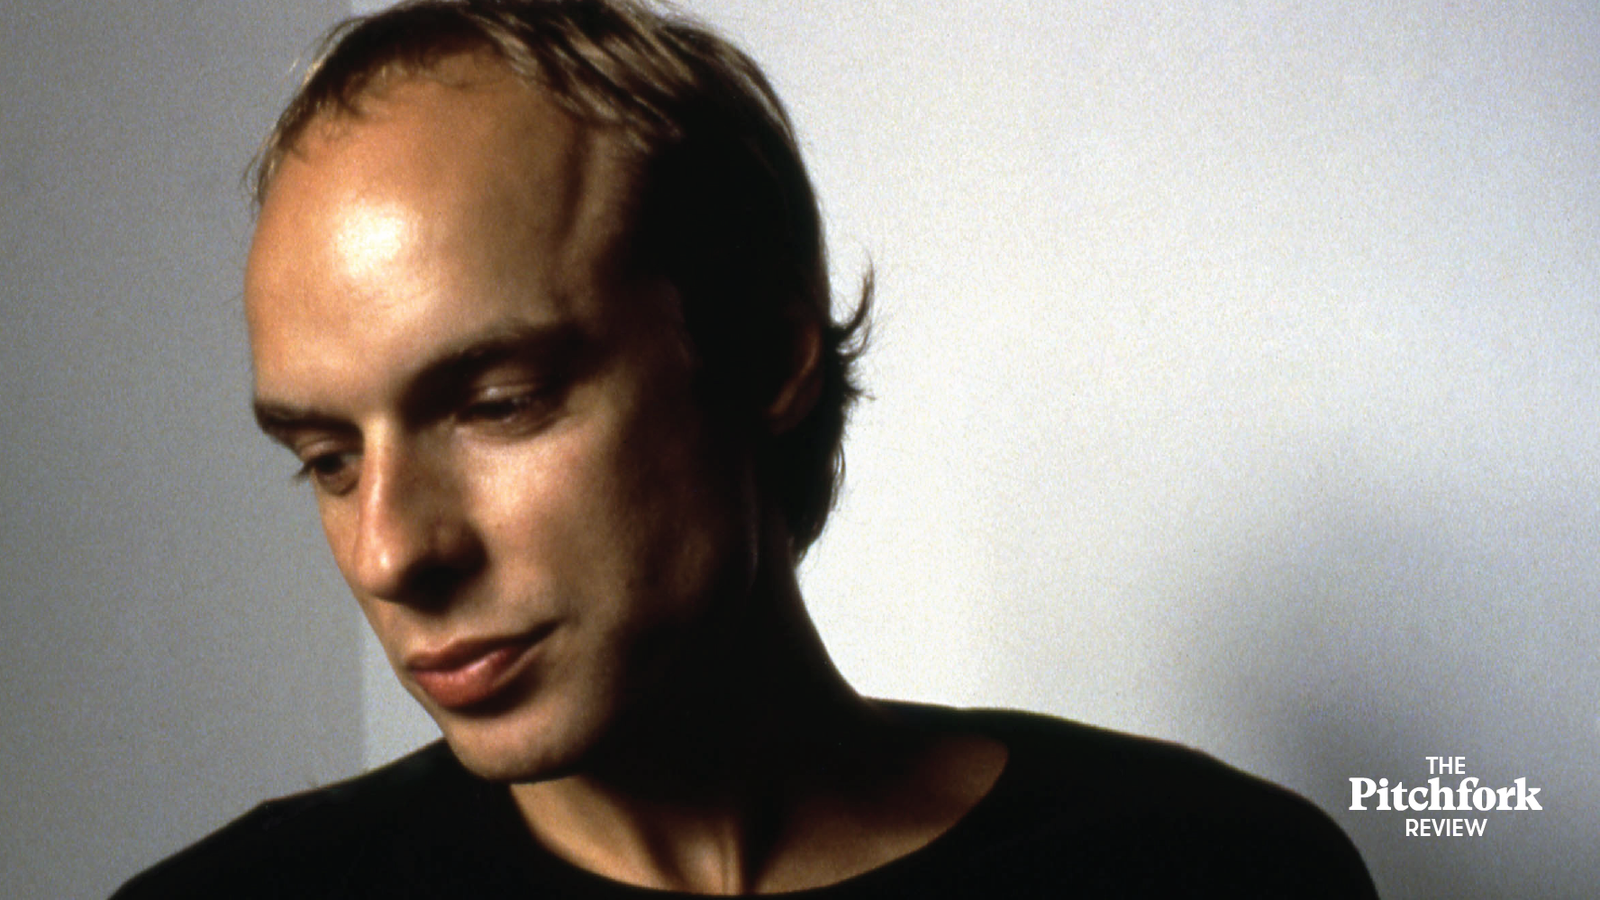 The Origins and Influence of Brian Eno’s Pioneering Album Ambient 1: Music for Airports